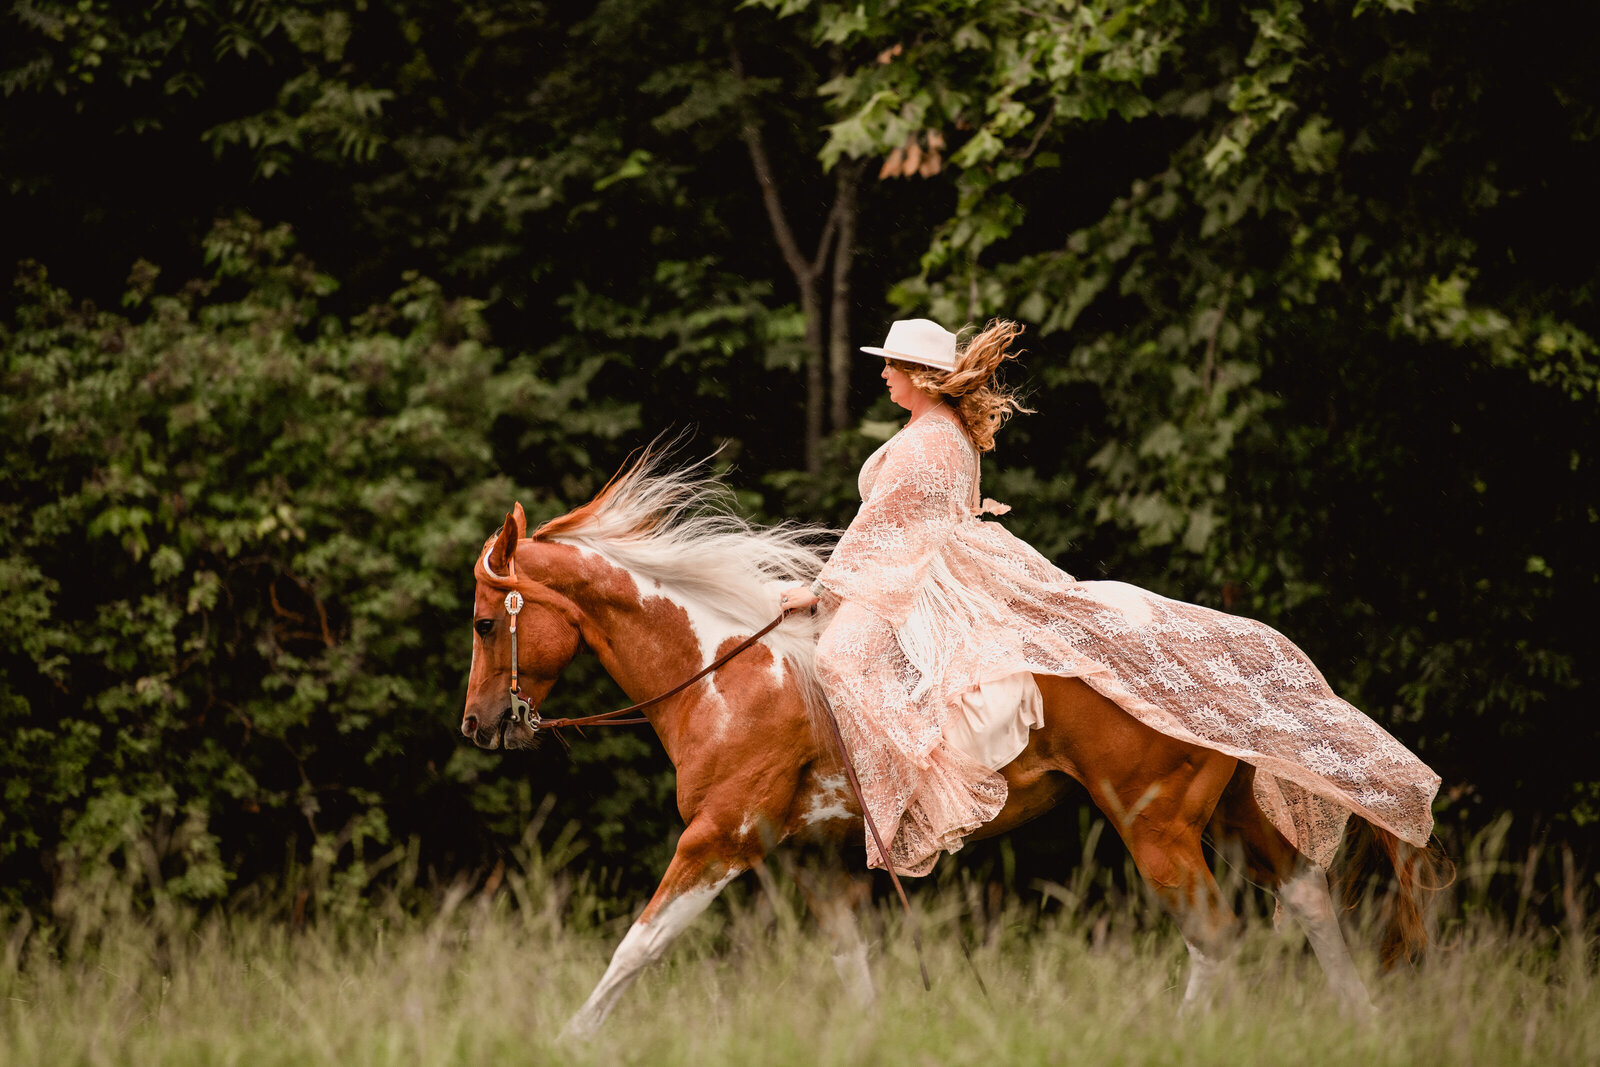 Reining horse mare with flowy dress loping bareback through a field.